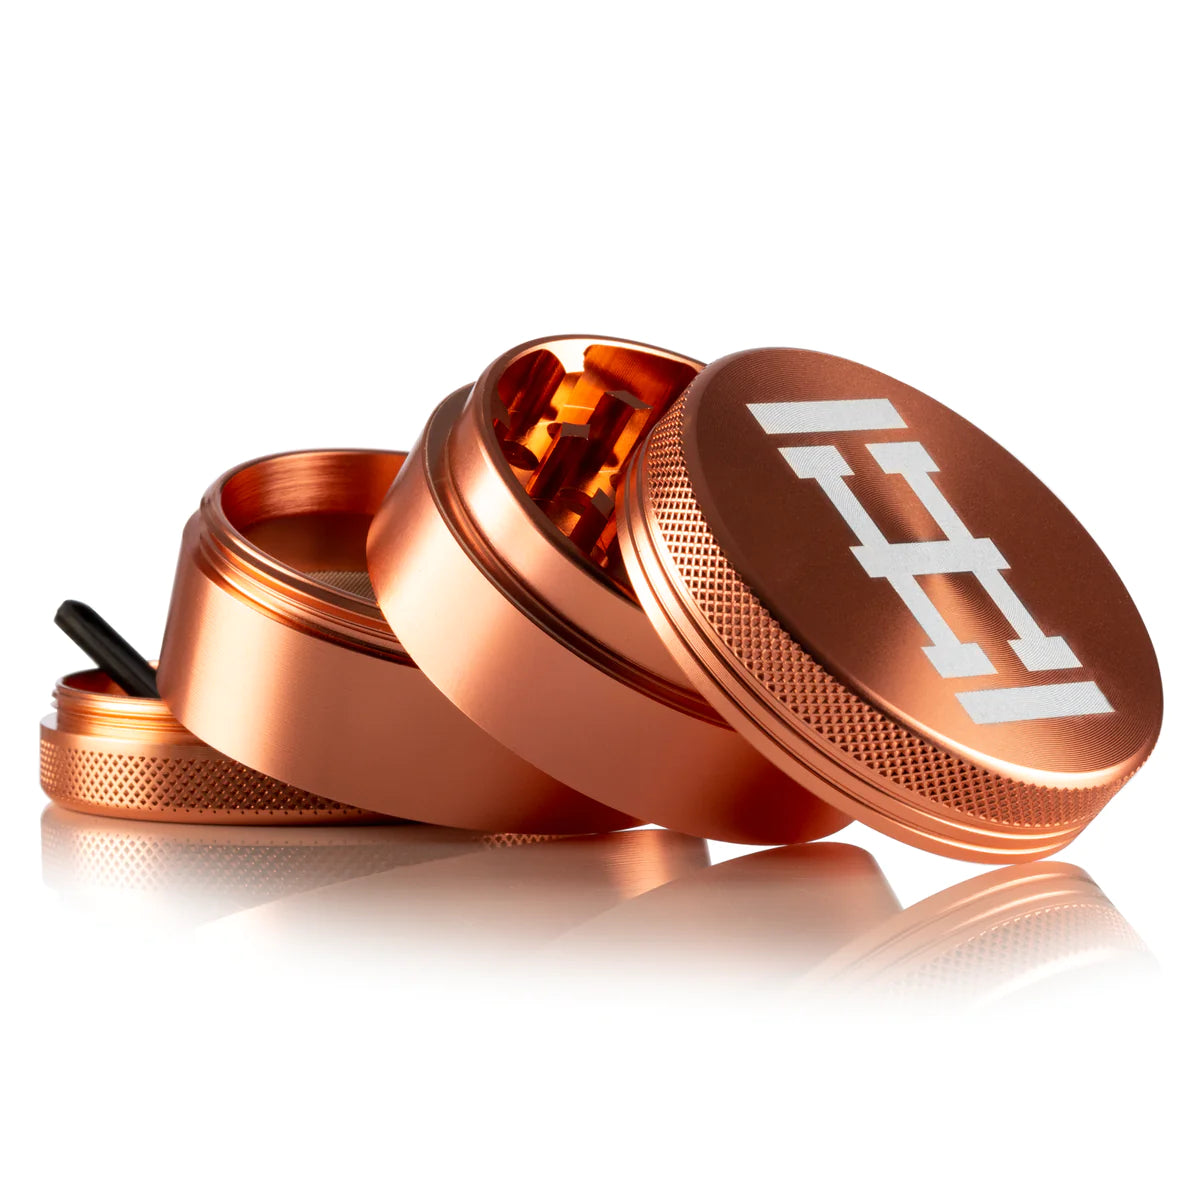 Hemper Aluminum Grinder 4-Piece in Large Size, Color Copper, with Textured Grip